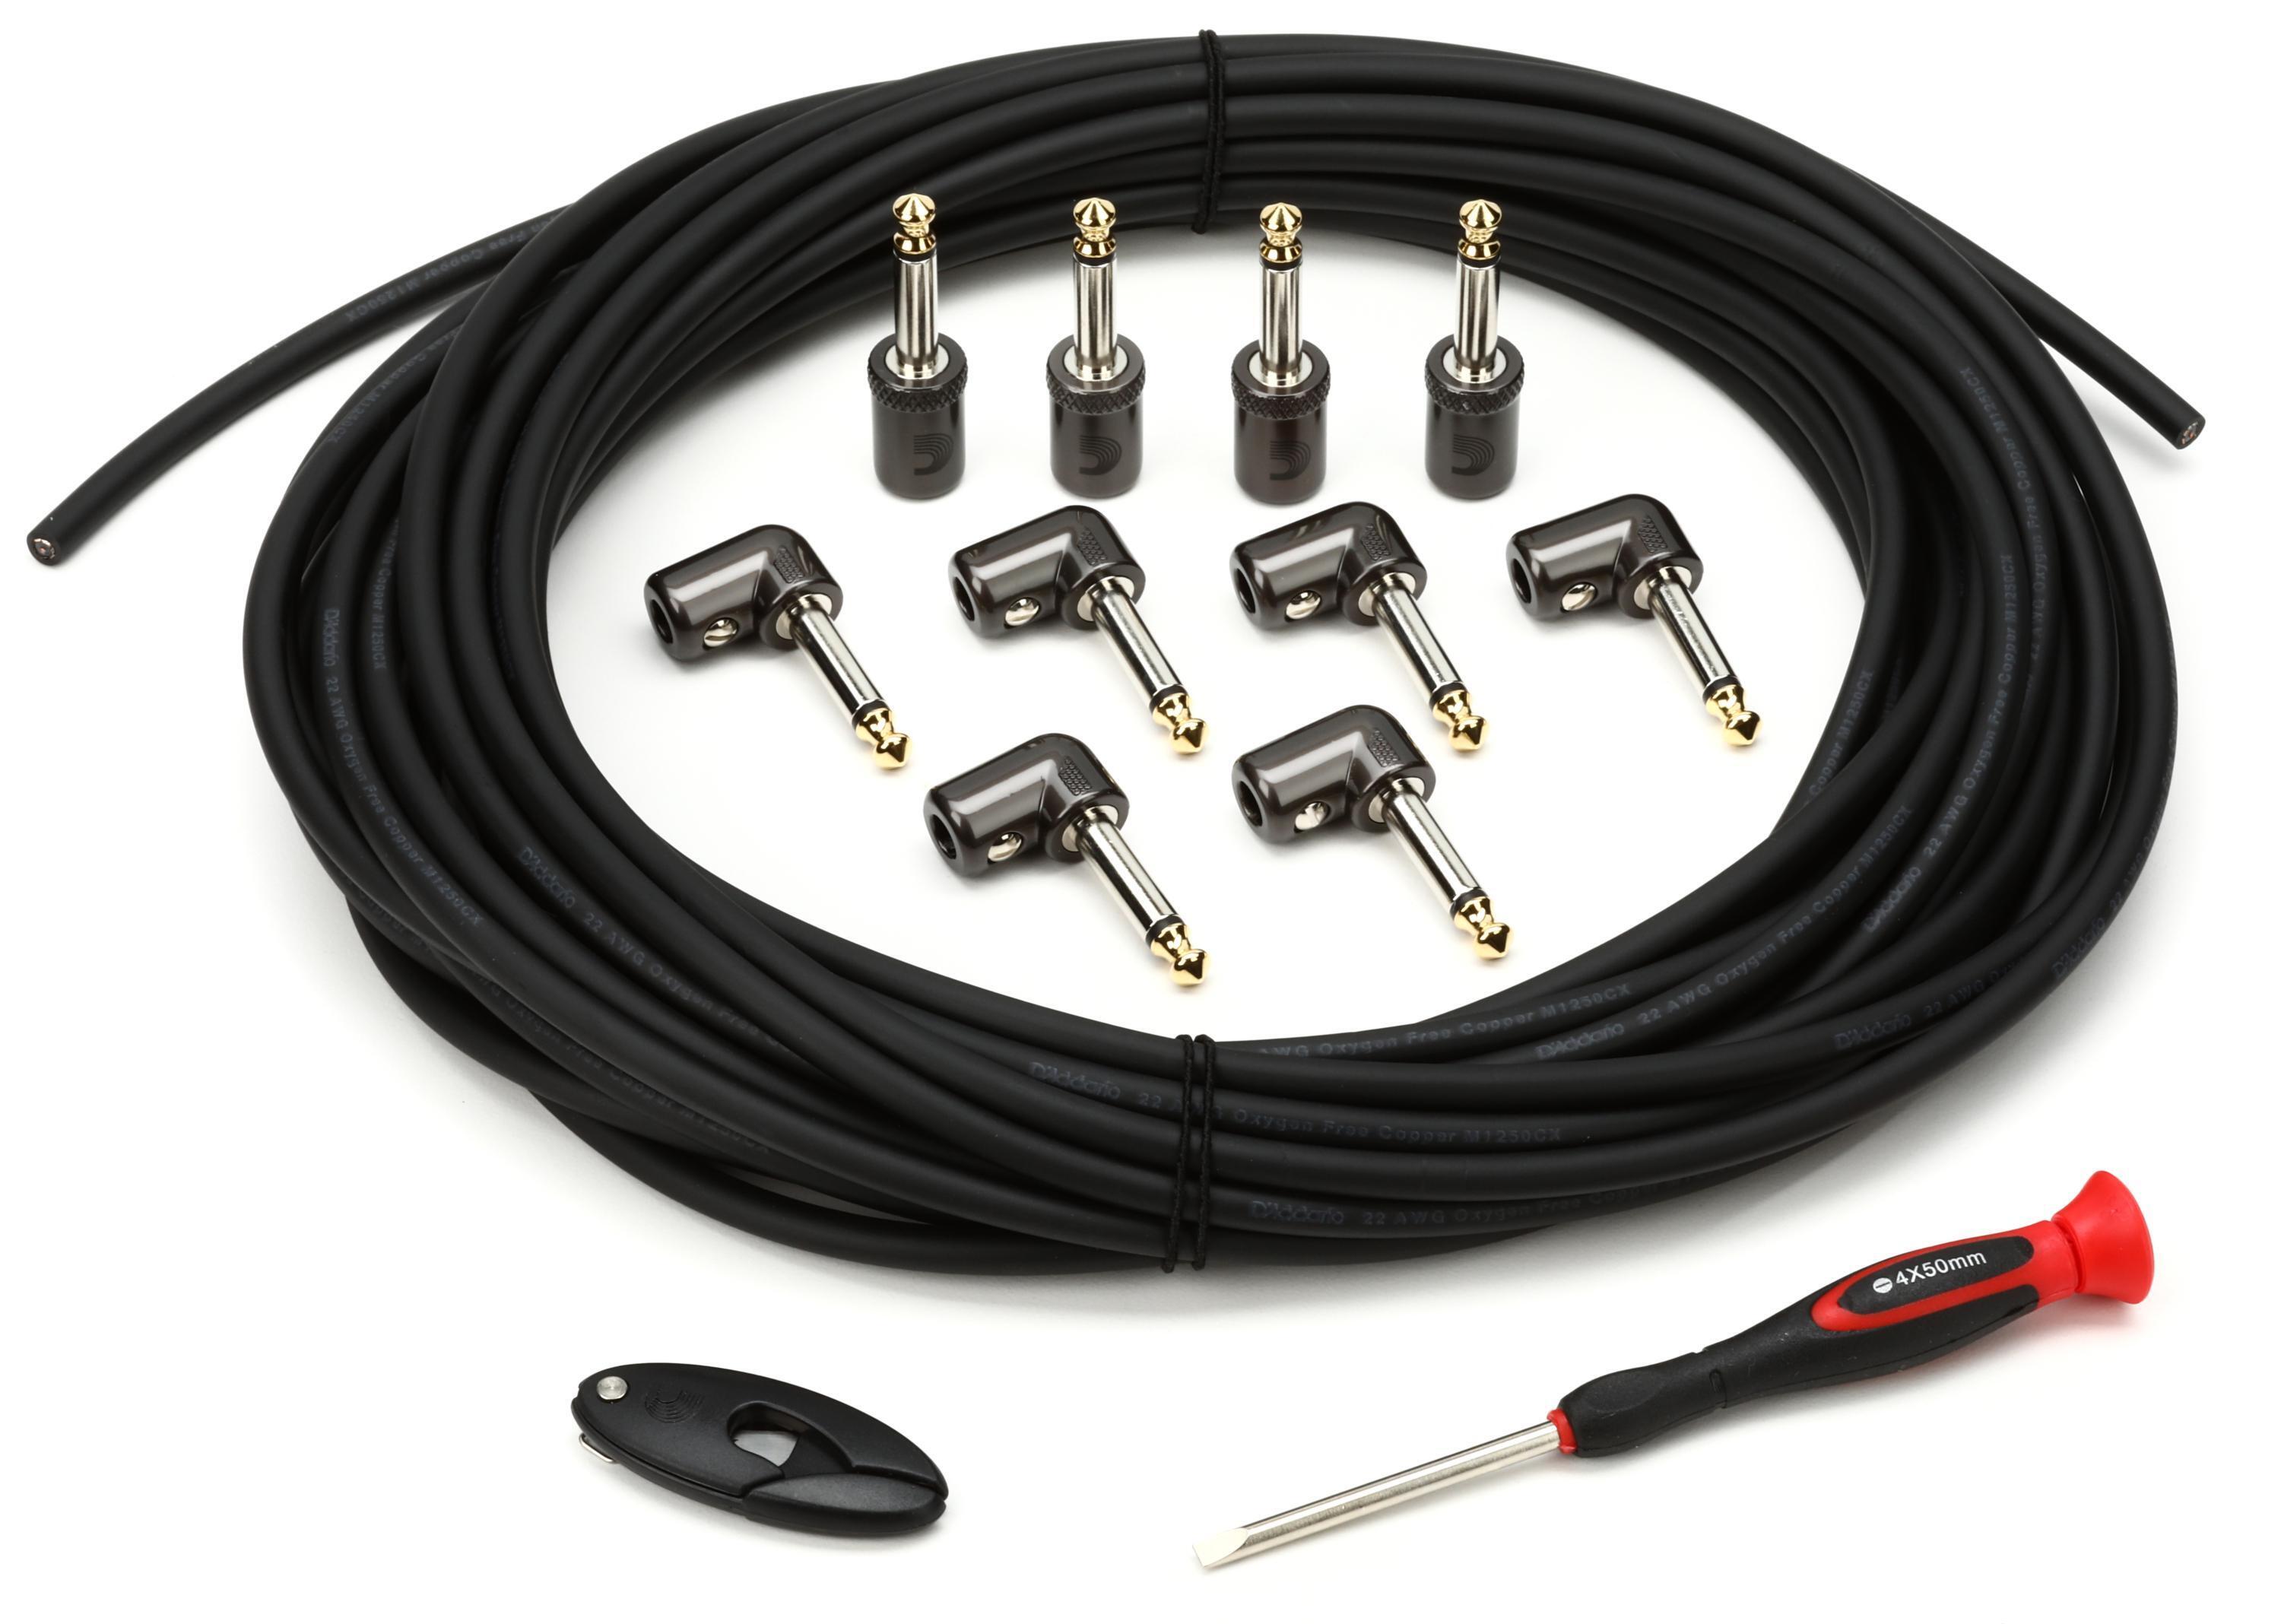 D'Addario Solderless Instrument Cable Kit | Sweetwater